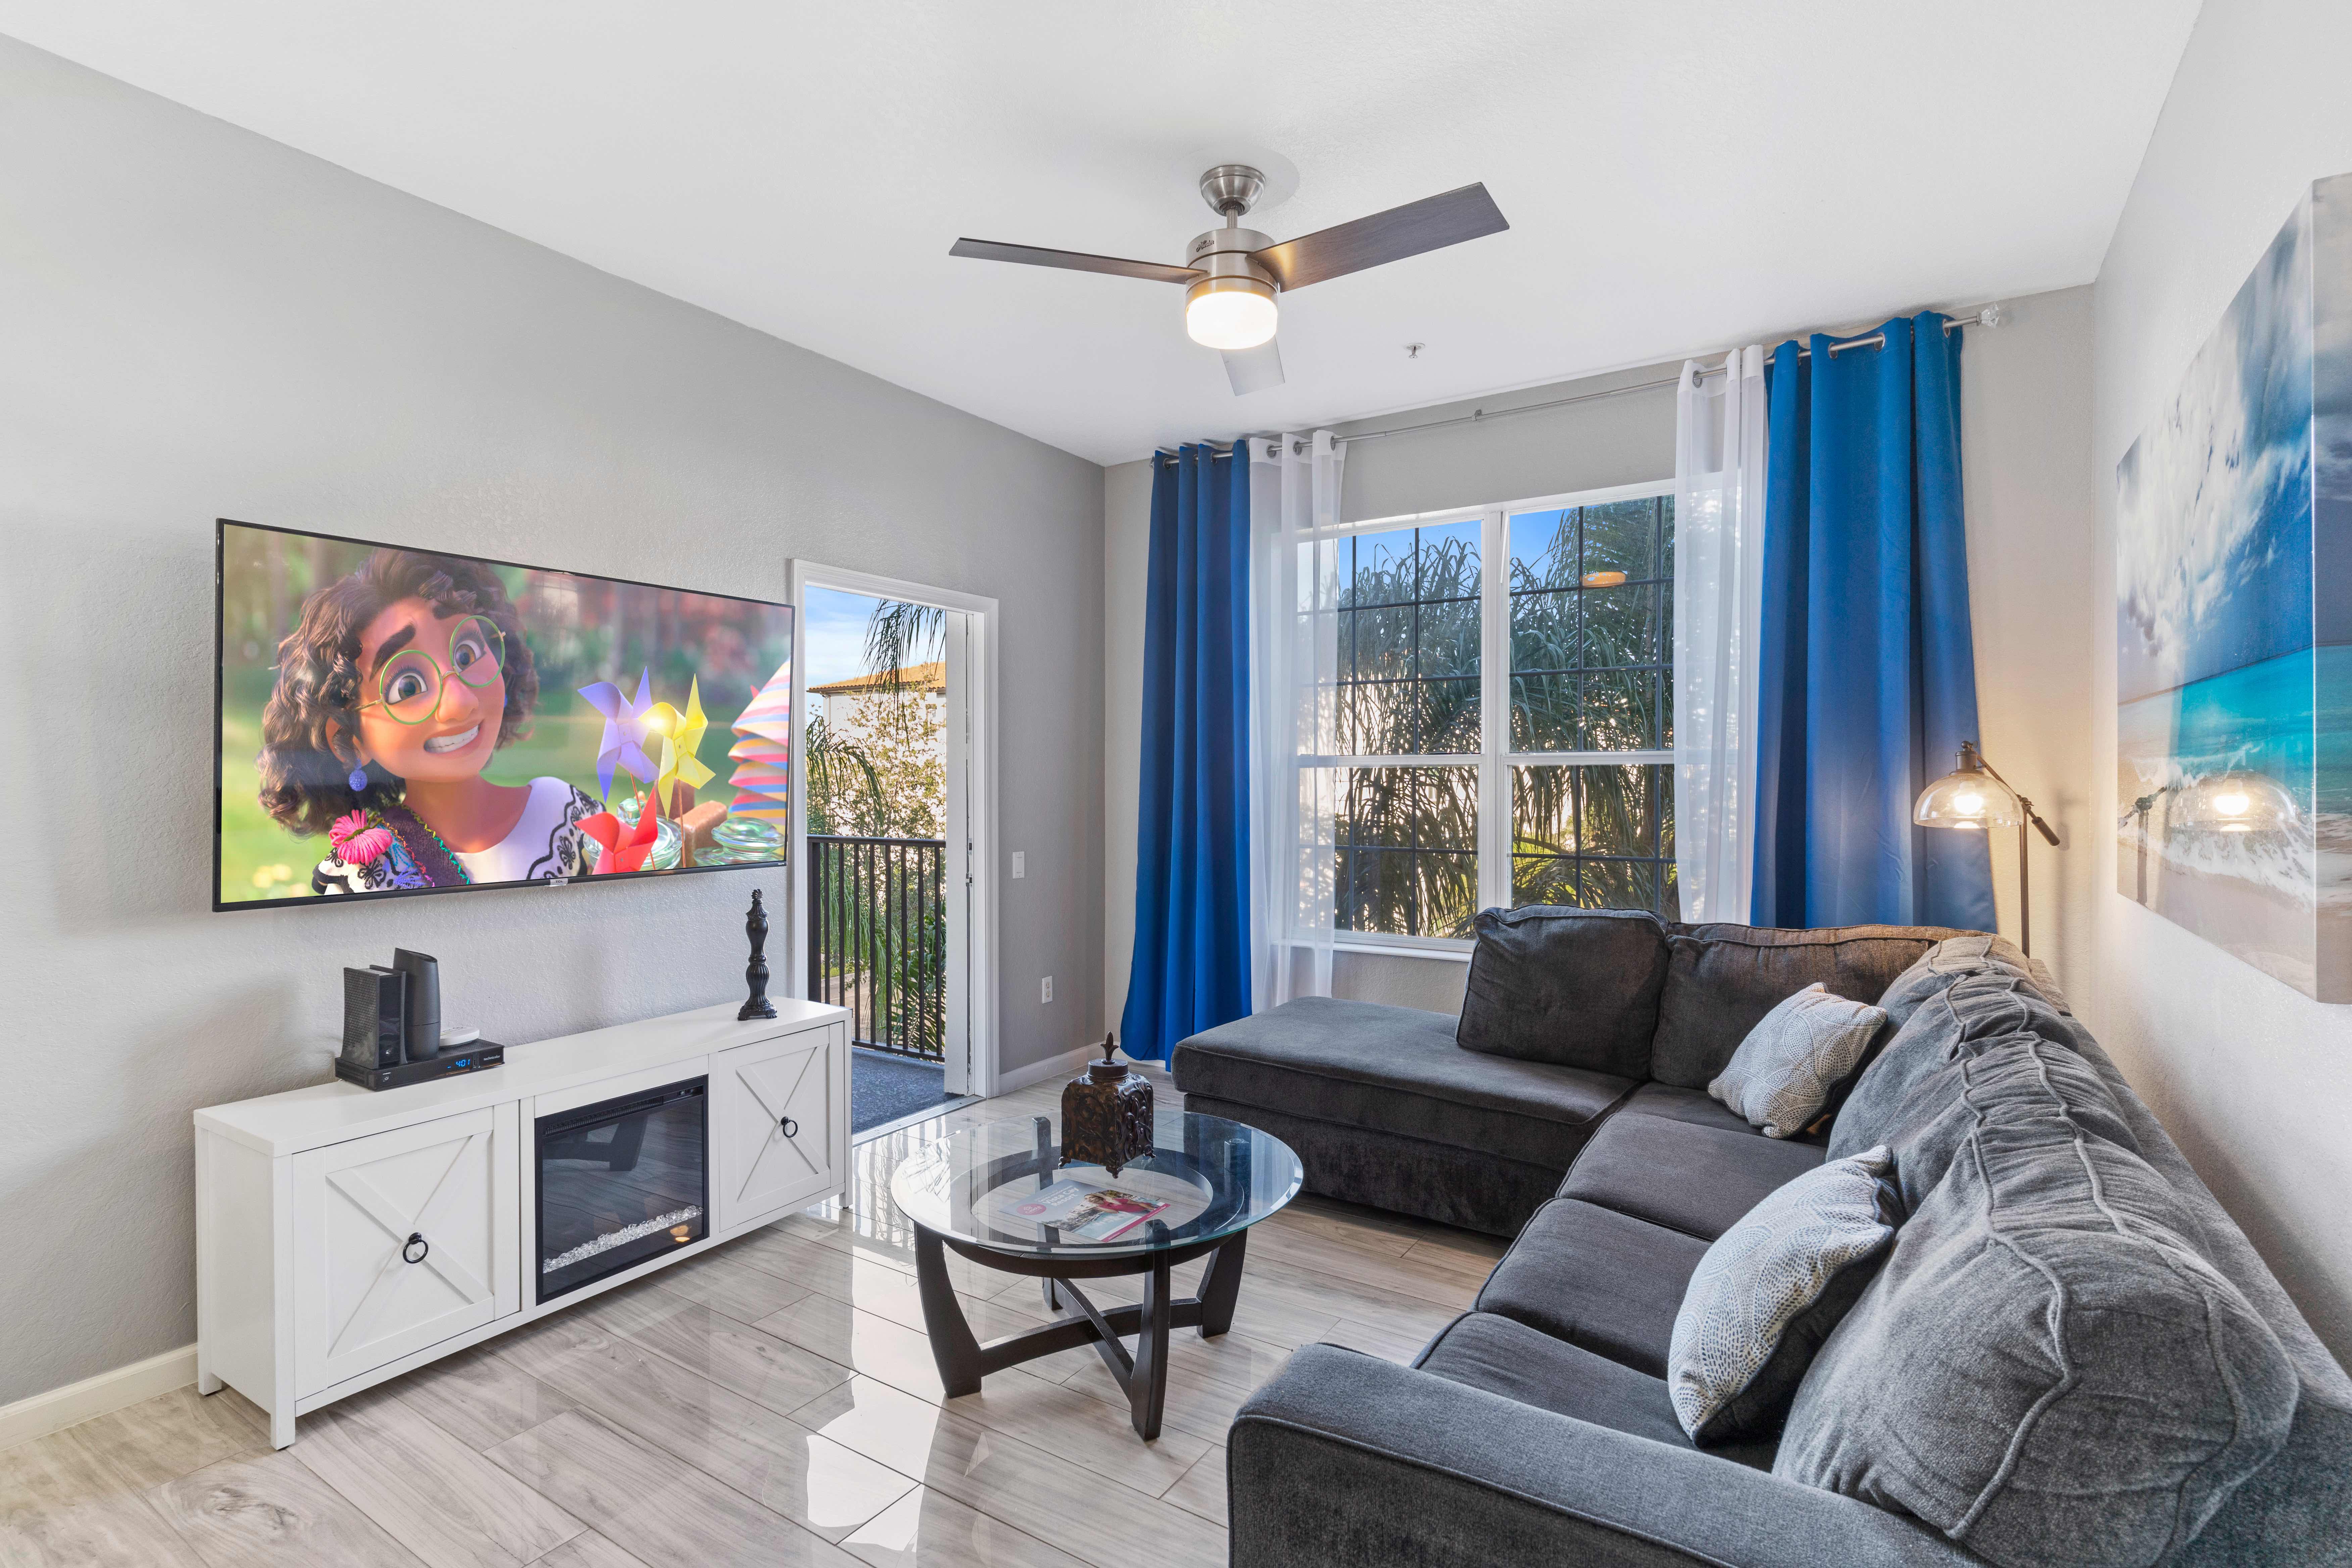 The living room at Vista Cay Resort is a welcoming retreat where guests can unwind and socialize, blending modern comfort with elegant design to create a cozy and inviting atmosphere within Orlando's vibrant ambiance.